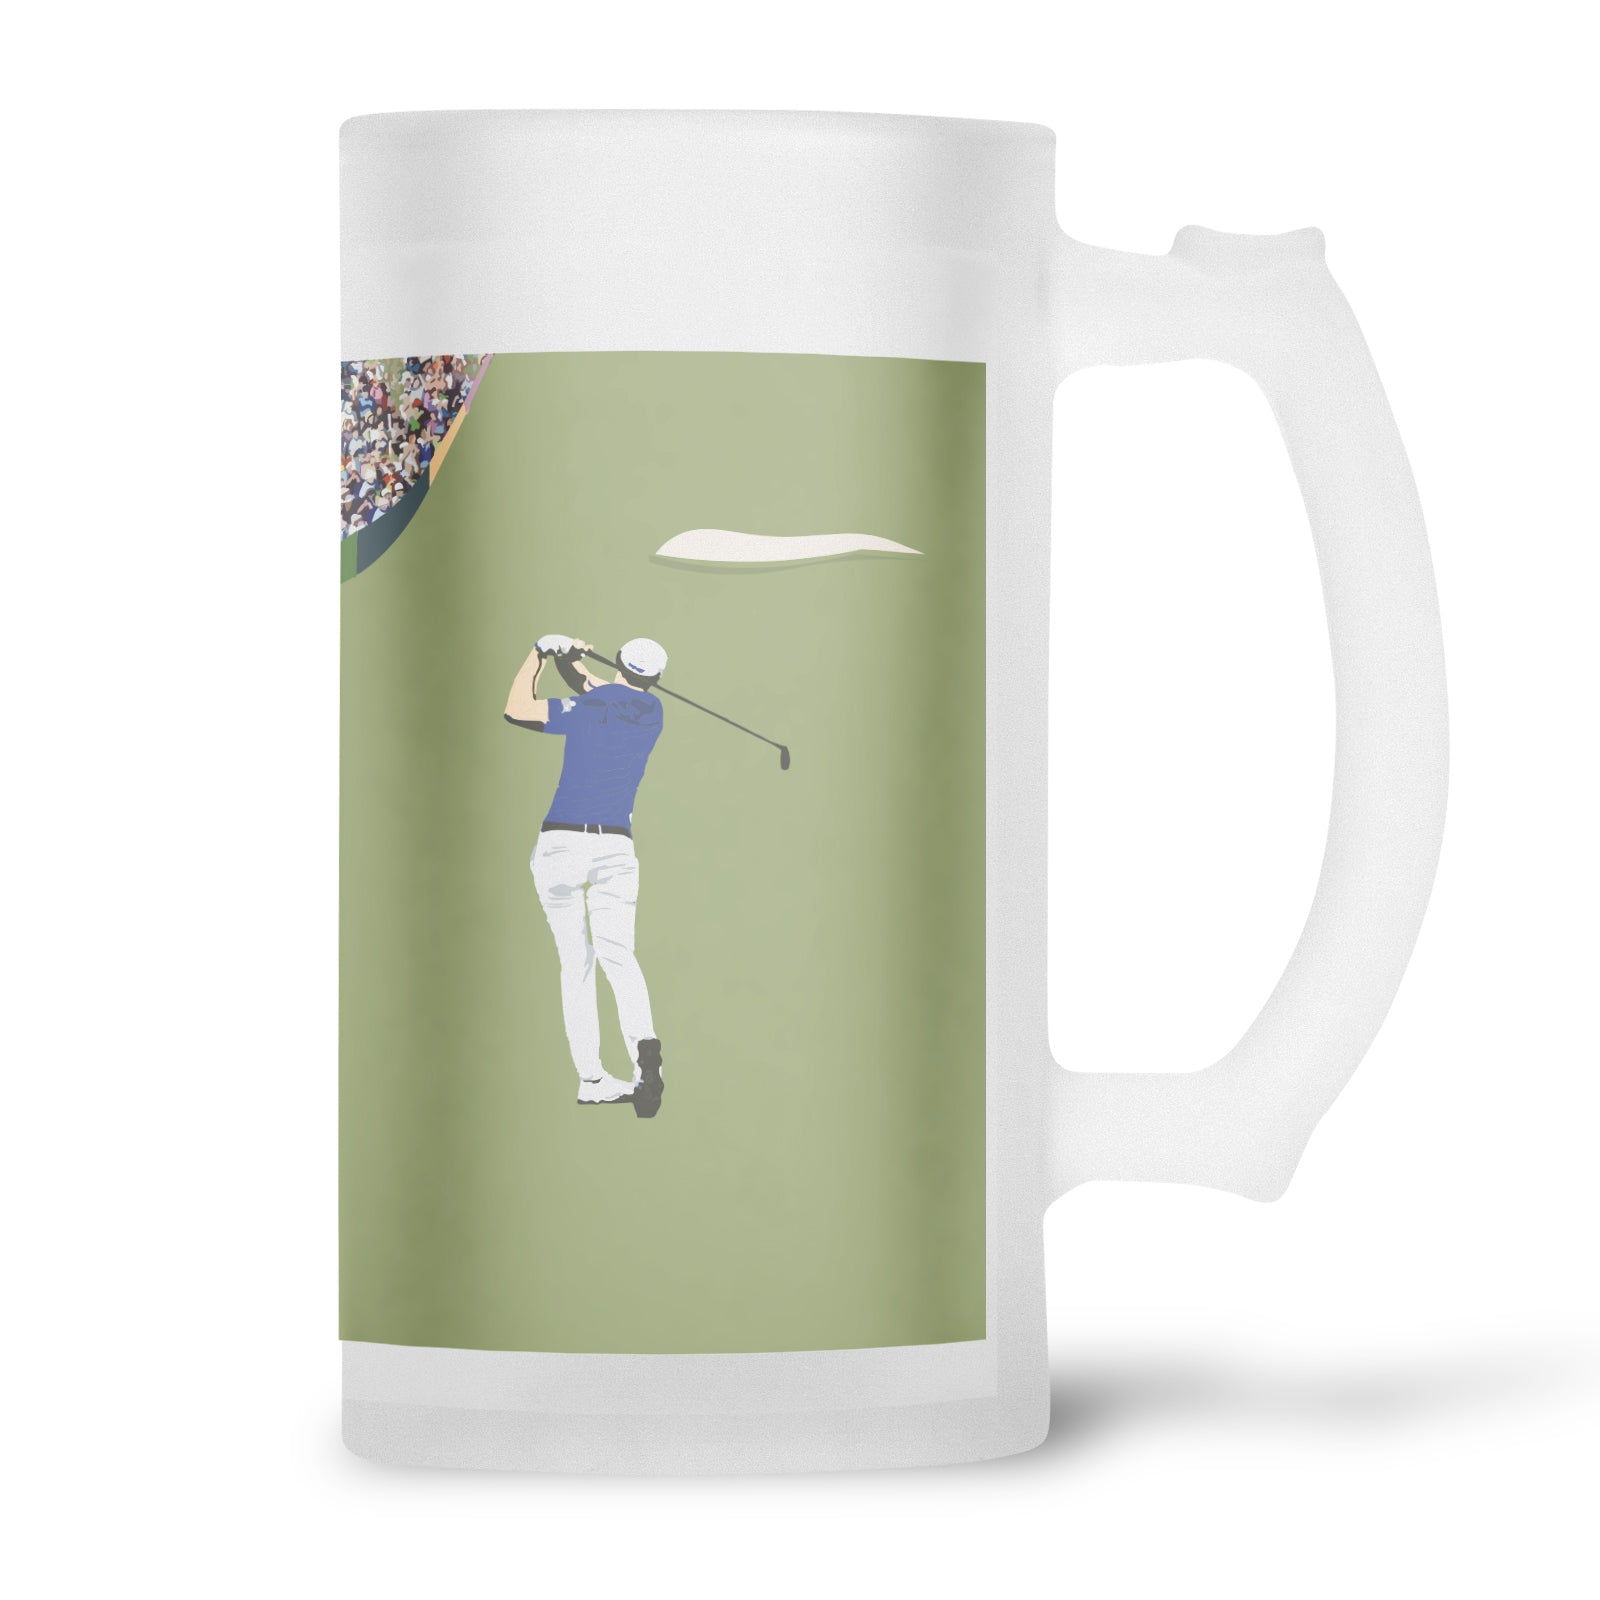  Golf  Frosted glass beer stein. Features golfer and golf buggy illustration.